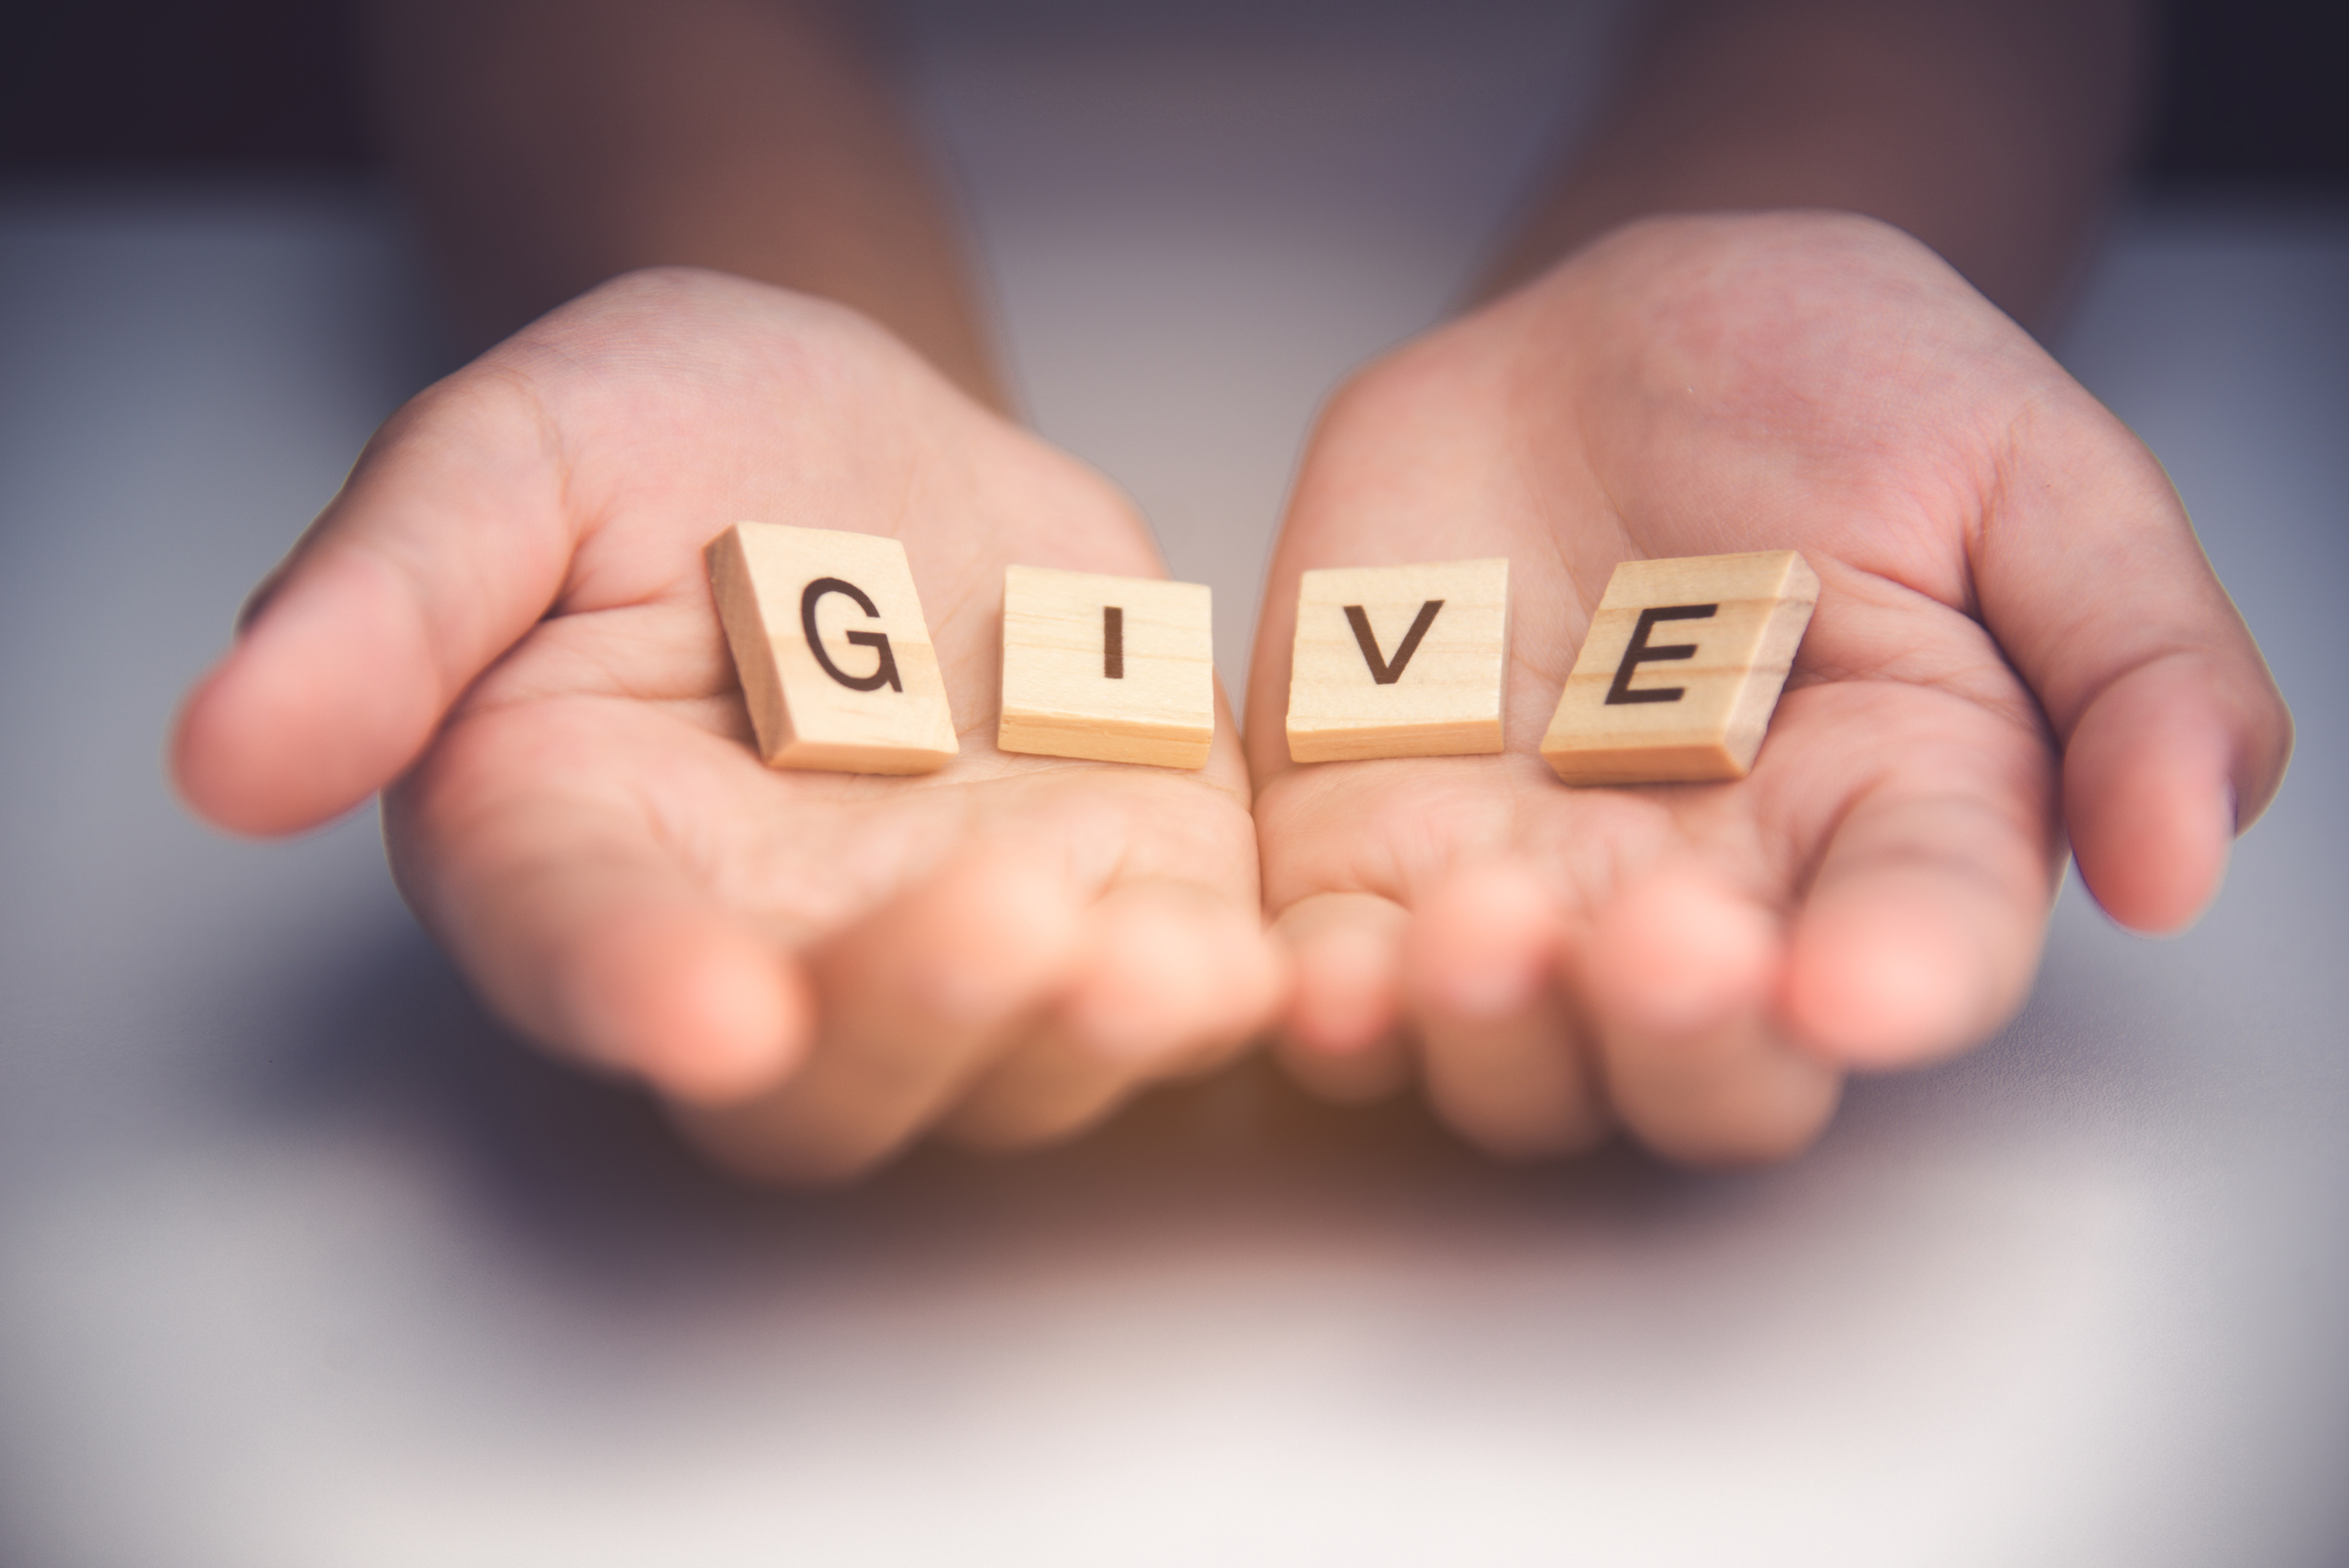 The Word "Give" on a Person's Hand